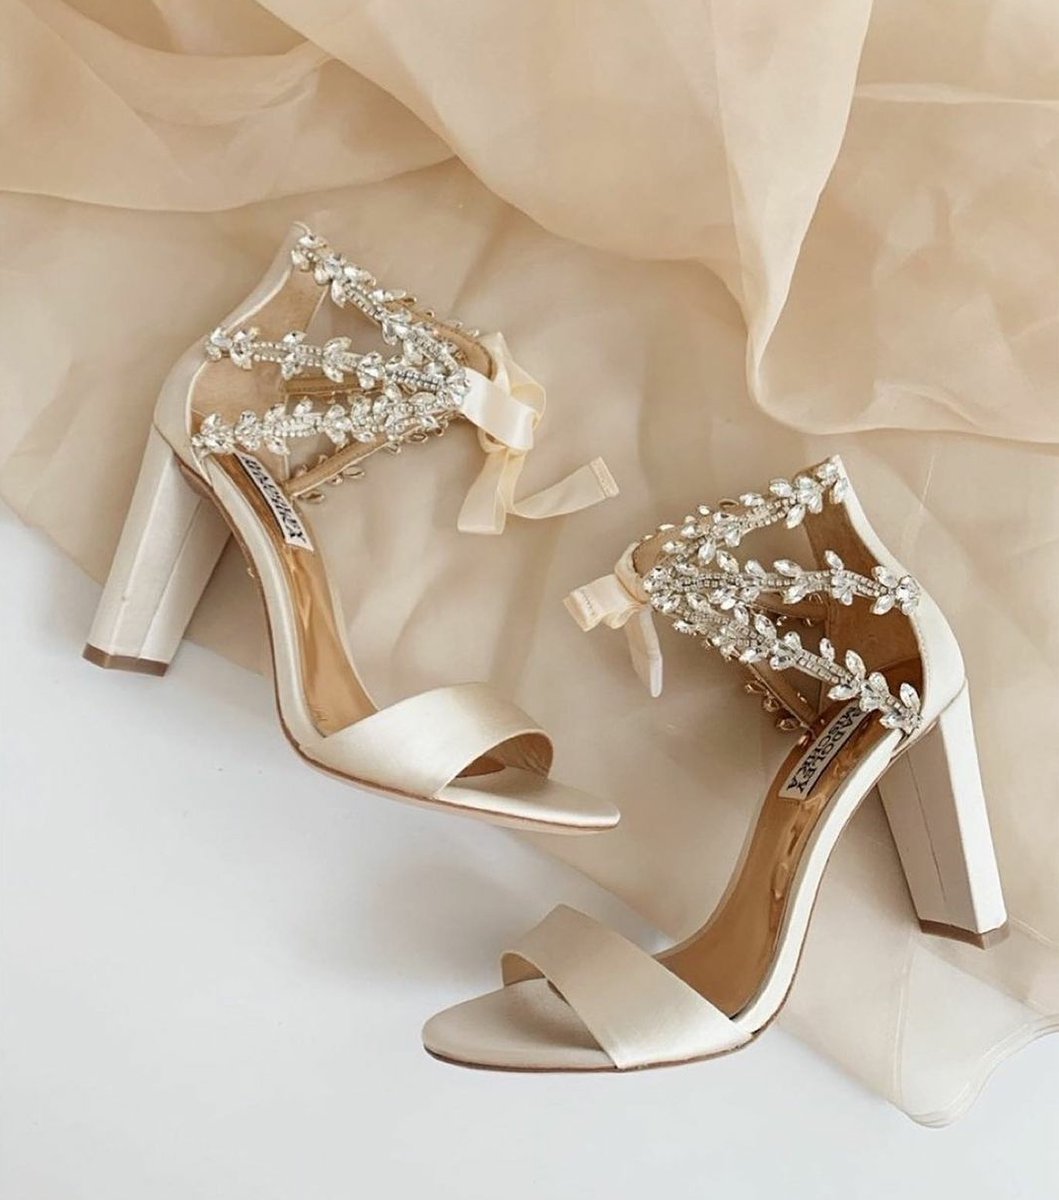 The perfect bridal shoe? 😍 @badgleymischkabride heels 💫#repost from @eternalbridal
.
.
.
#bridalshoes #heels #engaged #shoes